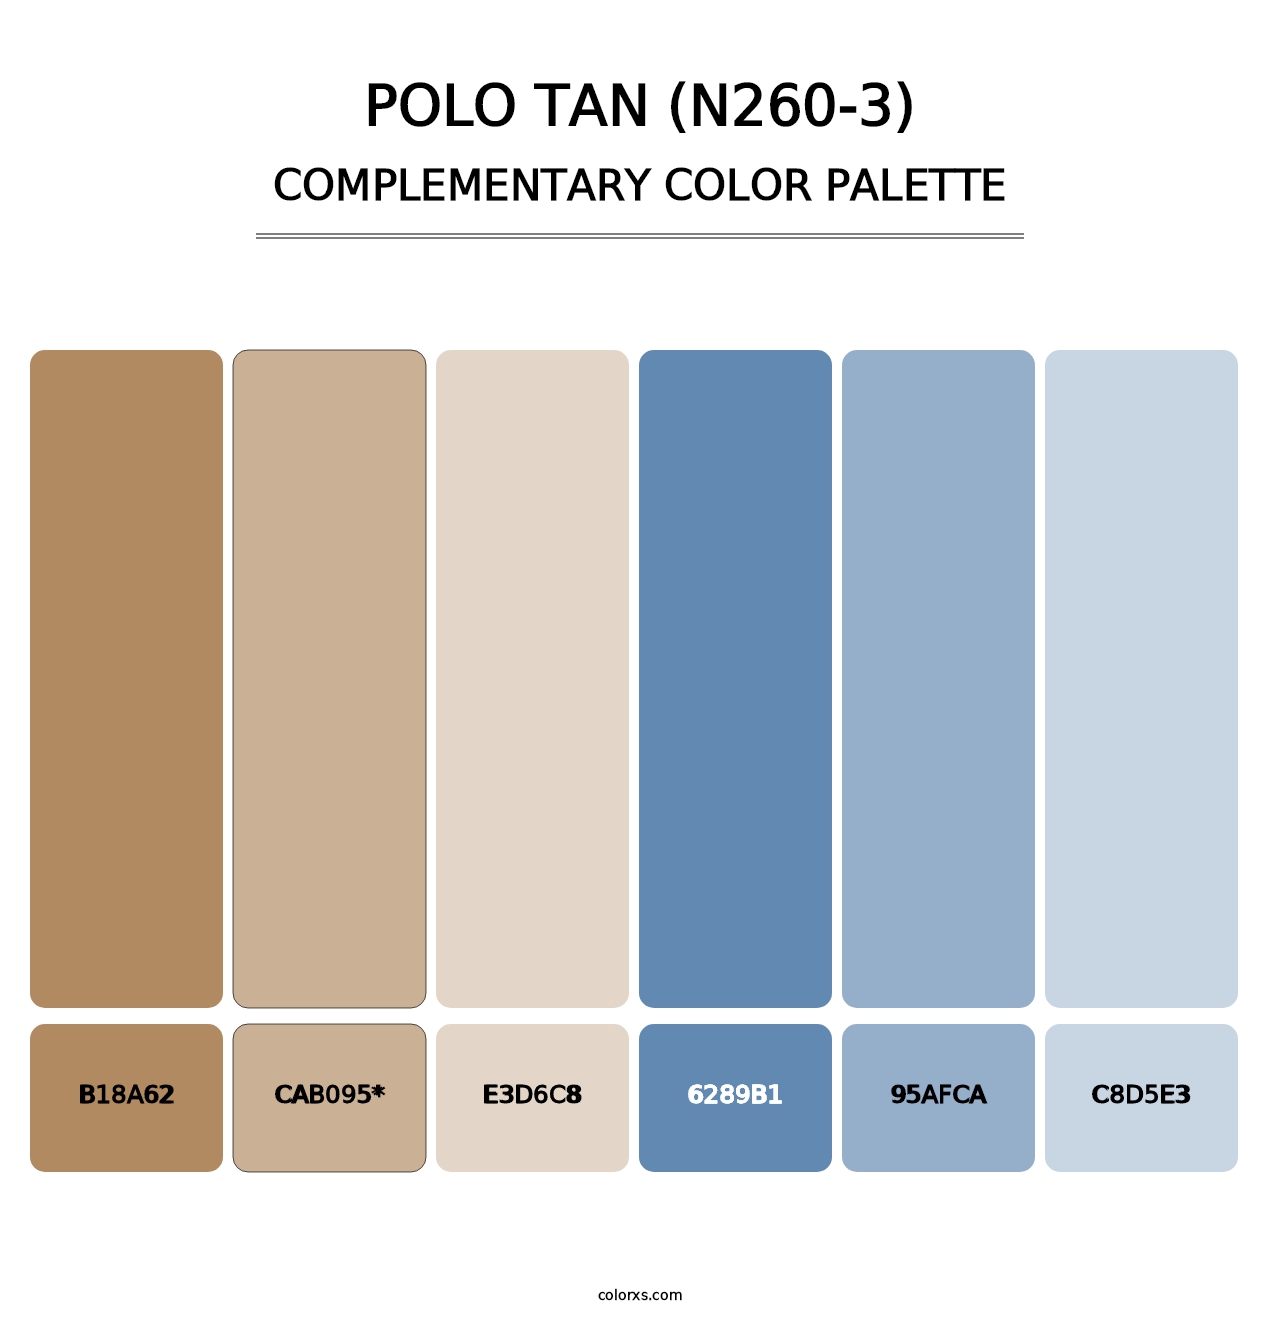 Polo Tan (N260-3) - Complementary Color Palette